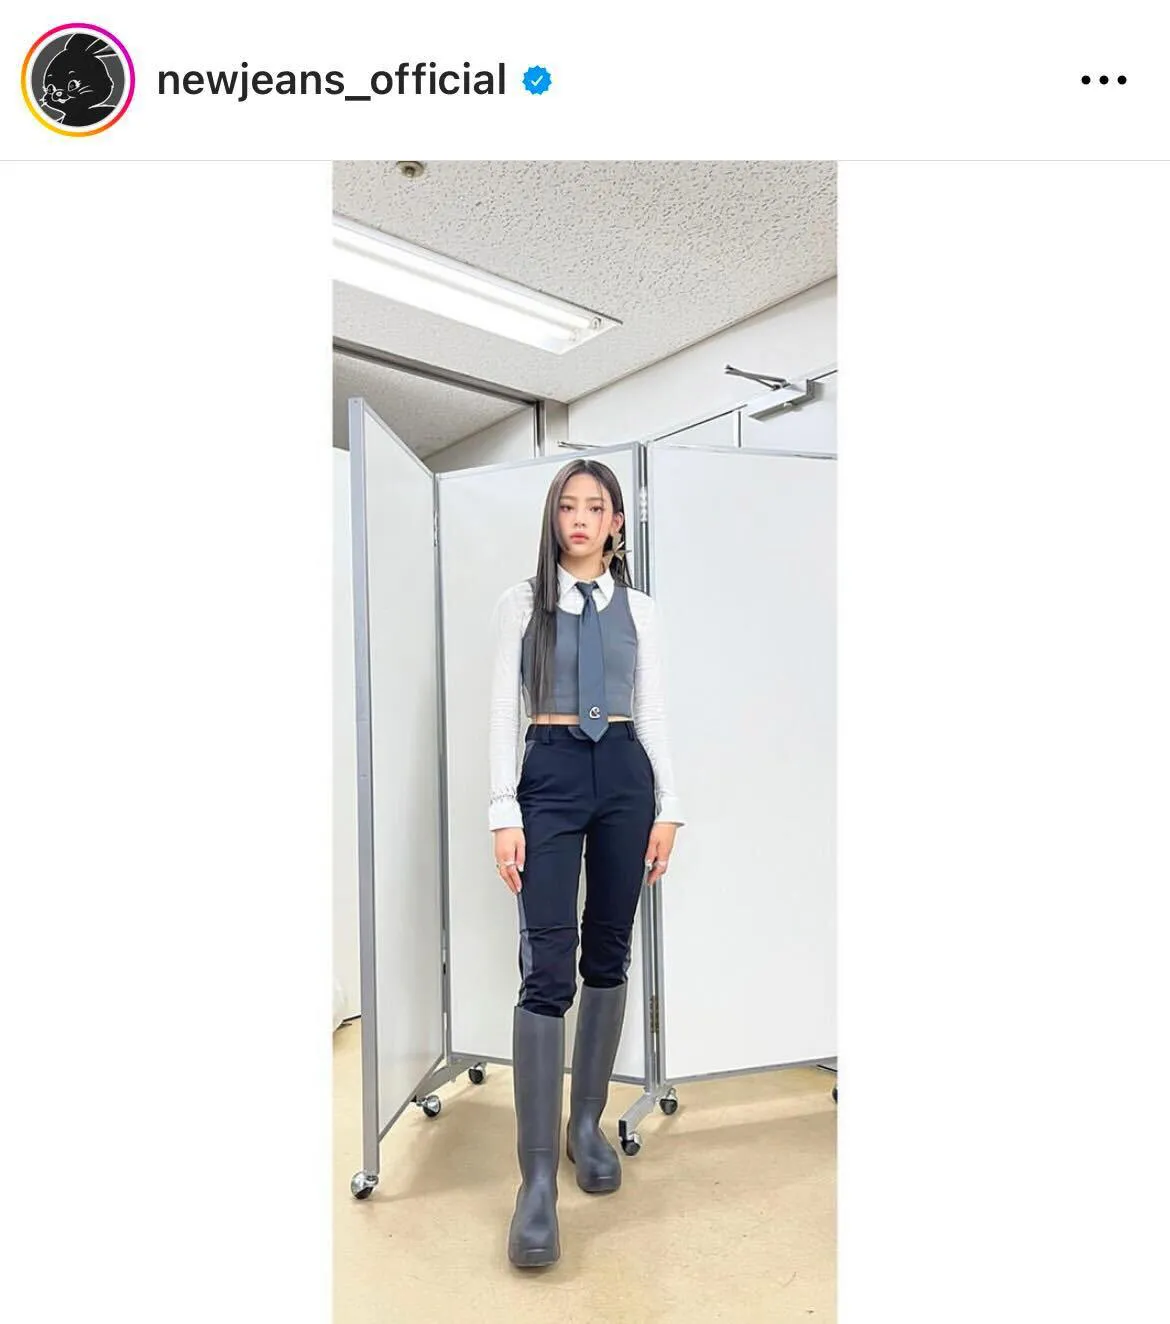  ※NewJeans公式Instagram(newjeans_official)より